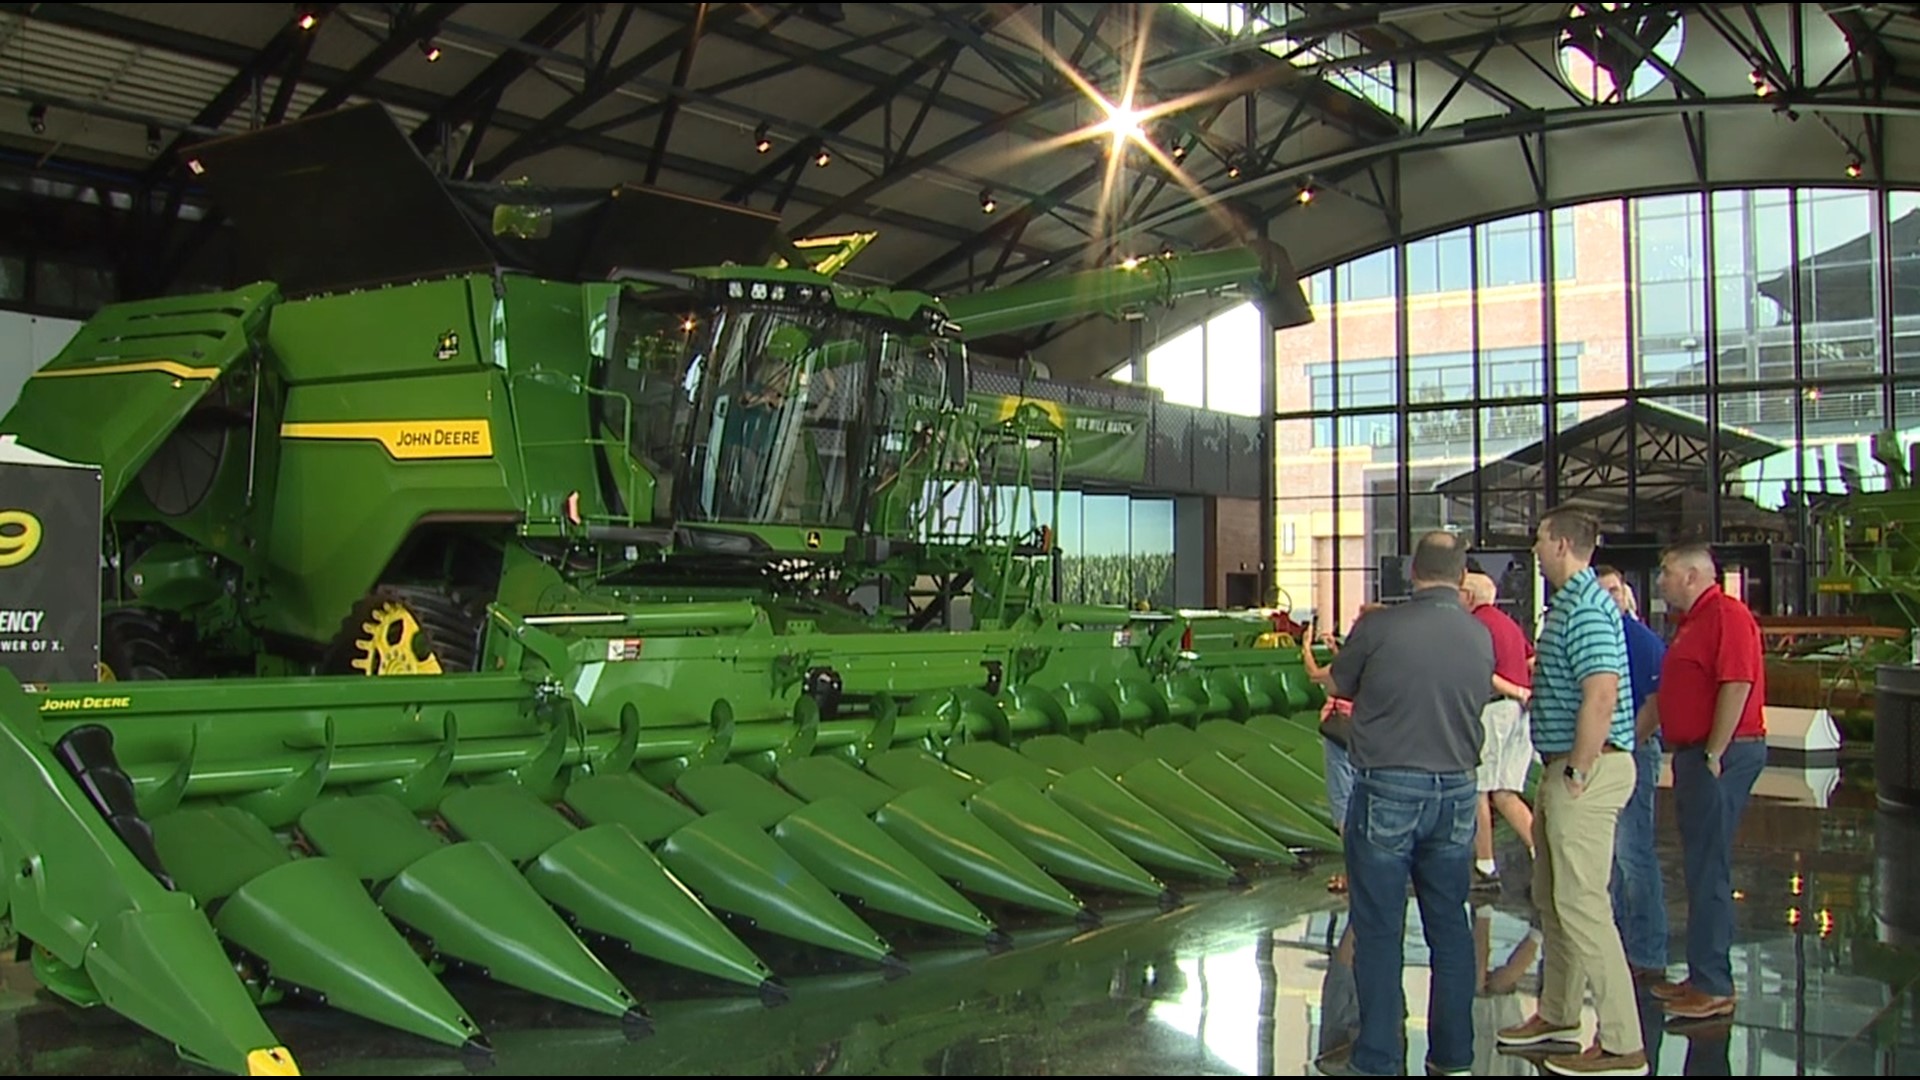 1,200 workers at the Tyson plant in central Iowa will be laid off at the end of June, and 150 John Deere workers in Ankeny will be laid off between March and May.